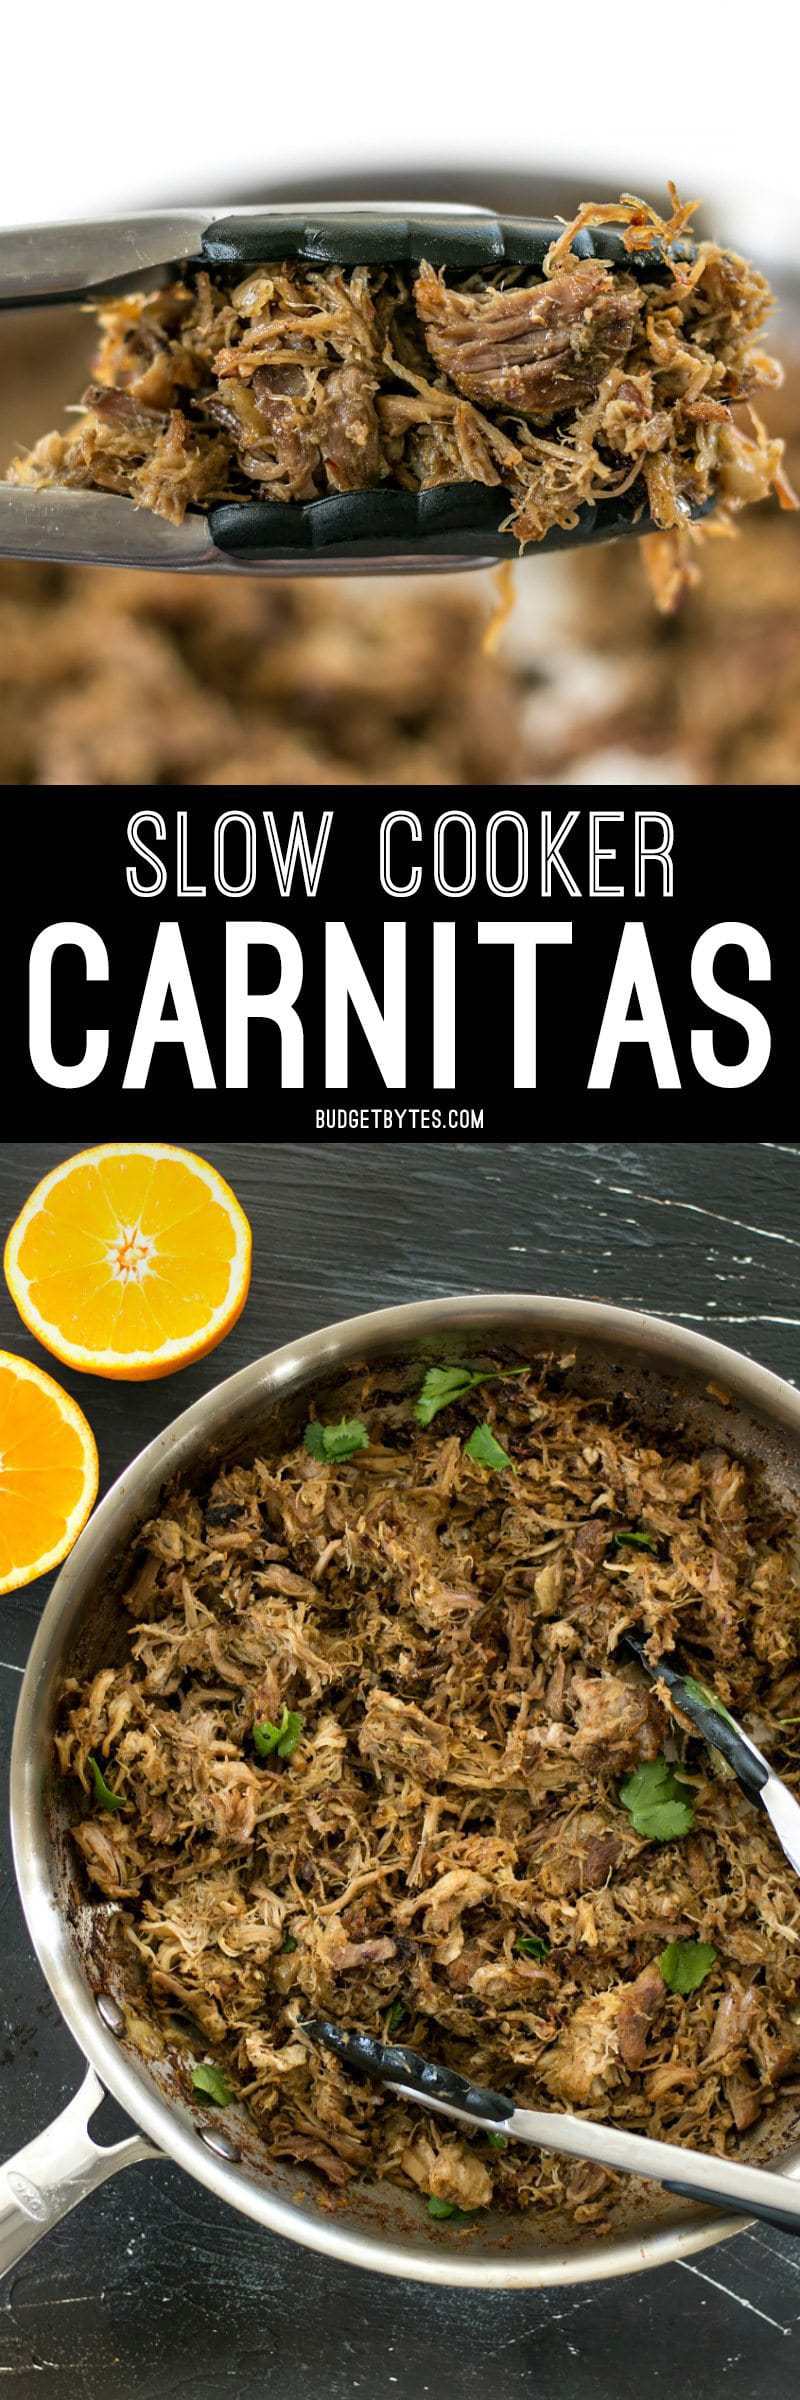 Warm spices, fresh orange essence, and a low slow cook time makes this Slow Cooker Carnitas tender, juicy, and full of flavor. BudgetBytes.com